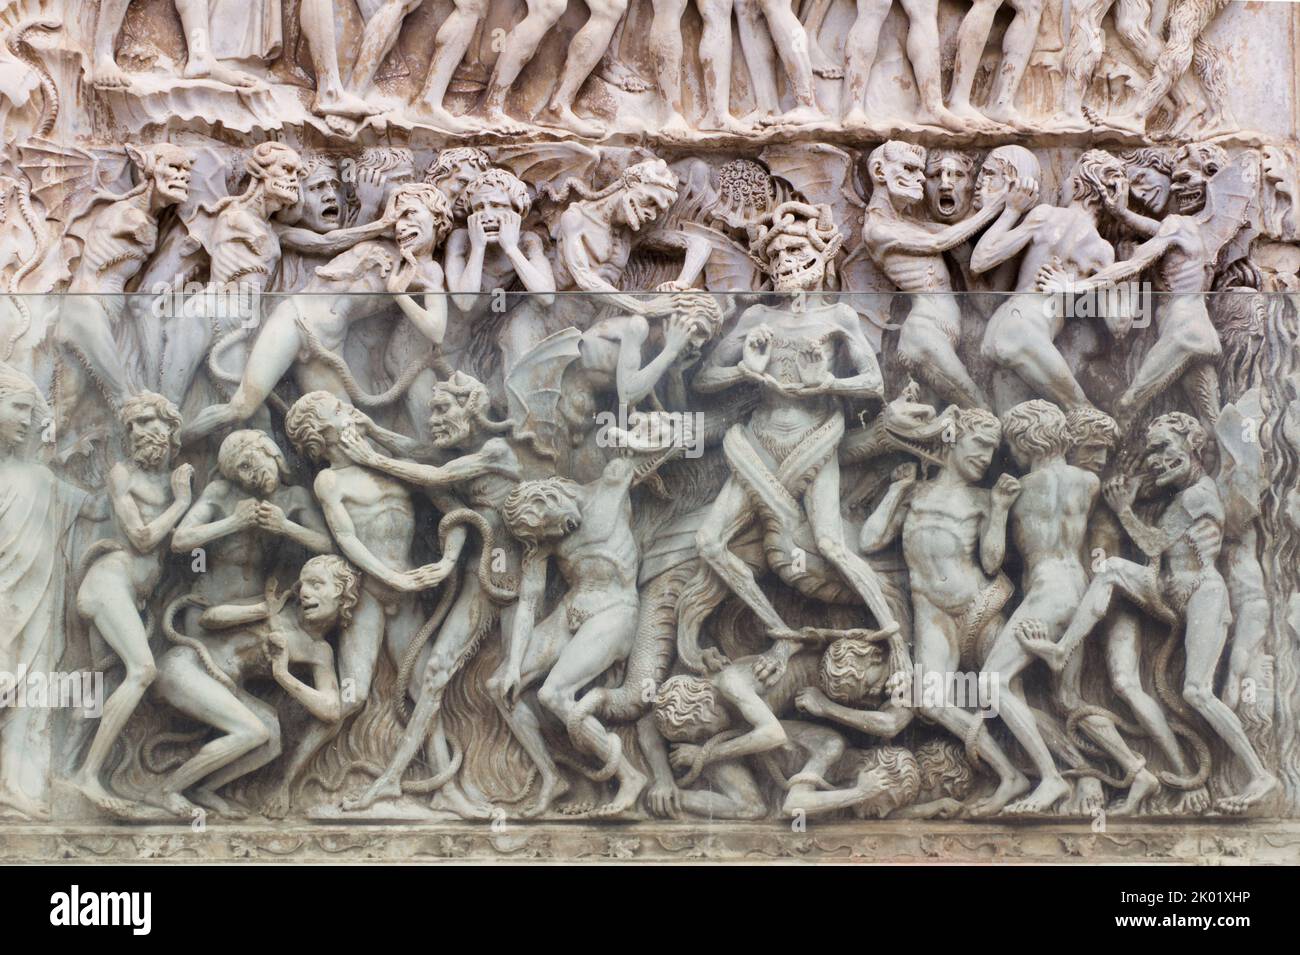 Last Judgement, Apocalypse (by Lorenzo Maitani, 14th century) - detail - Bas-relief from the 4th pillar - Facade of Orvieto cathedral - Umbria - Italy Stock Photo